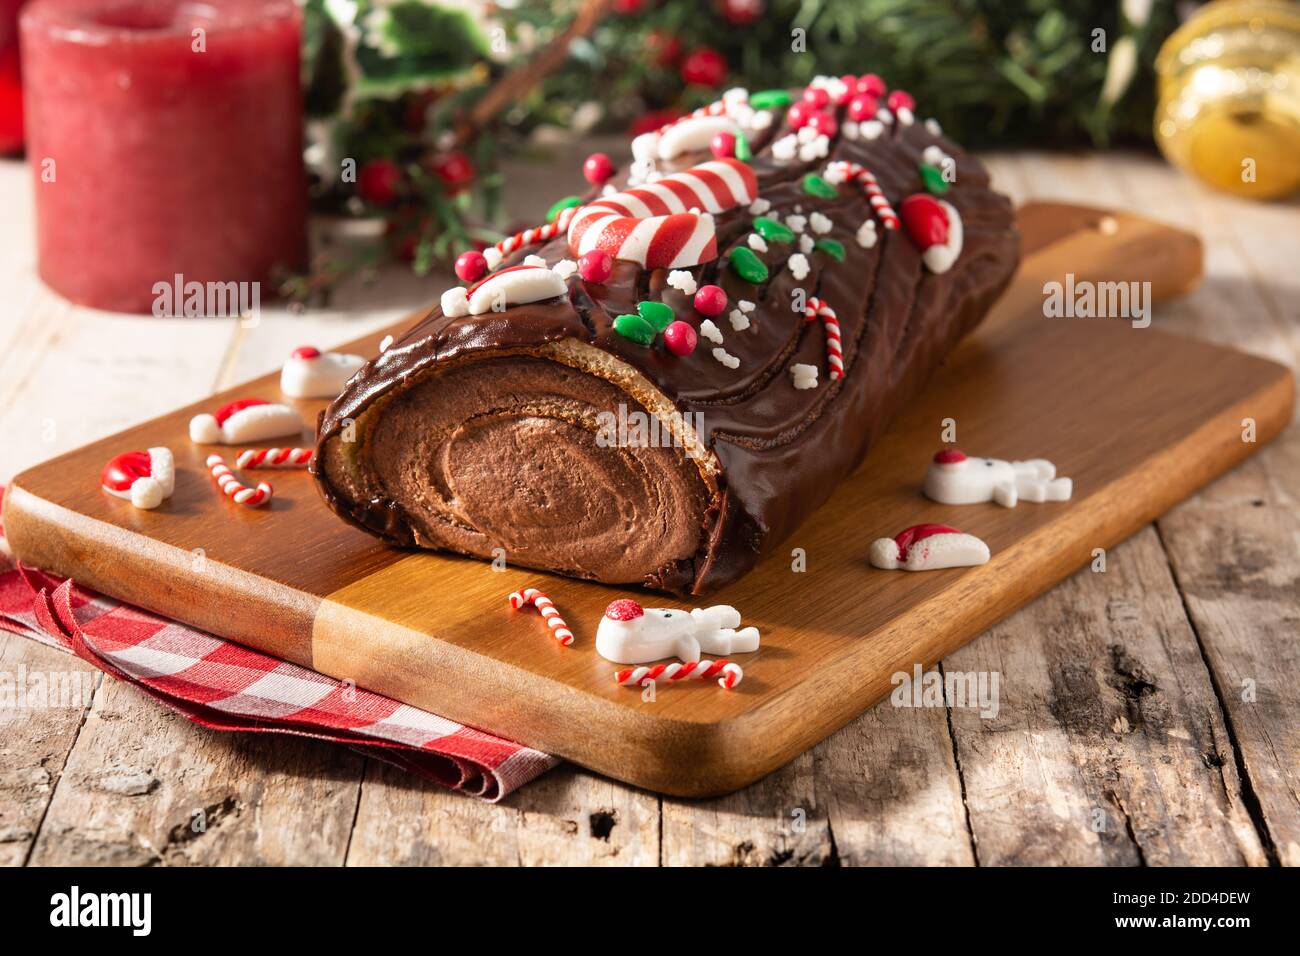 Three different patisserie Buches de Noel in dark and light chocolate  decorated with fruit and Christmas ornaments Stock Photo - Alamy